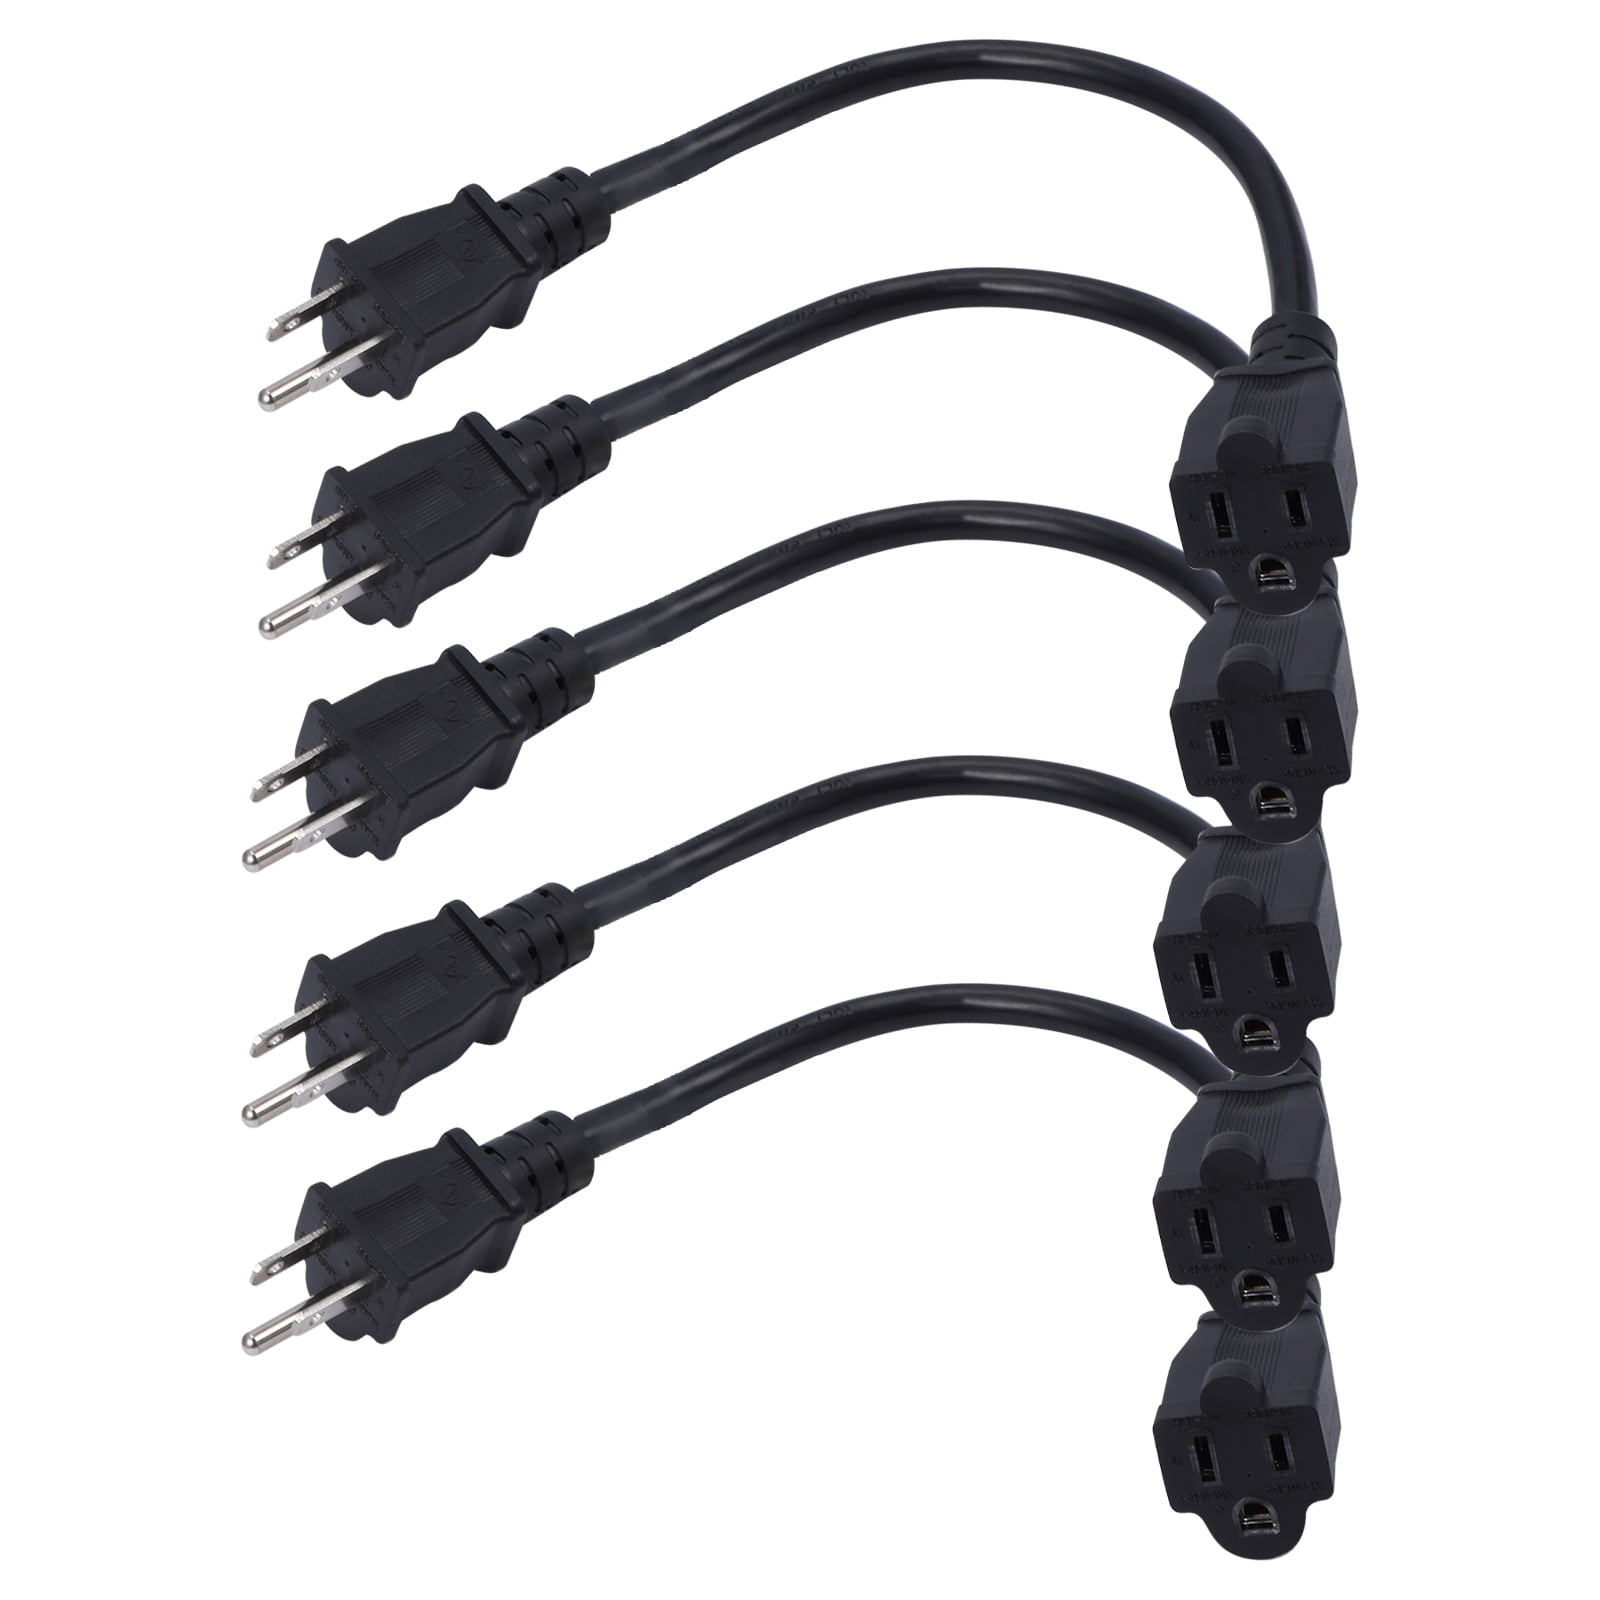 5Pack 16 AWG Heavy Duty Power Extension Cord 1 ft,Outdoor Extension Cable  with 3 Prong Grounded 16/3 SJTW 125V 13A 1625W Power Cable for Indoor  Outdoor UL Listed 